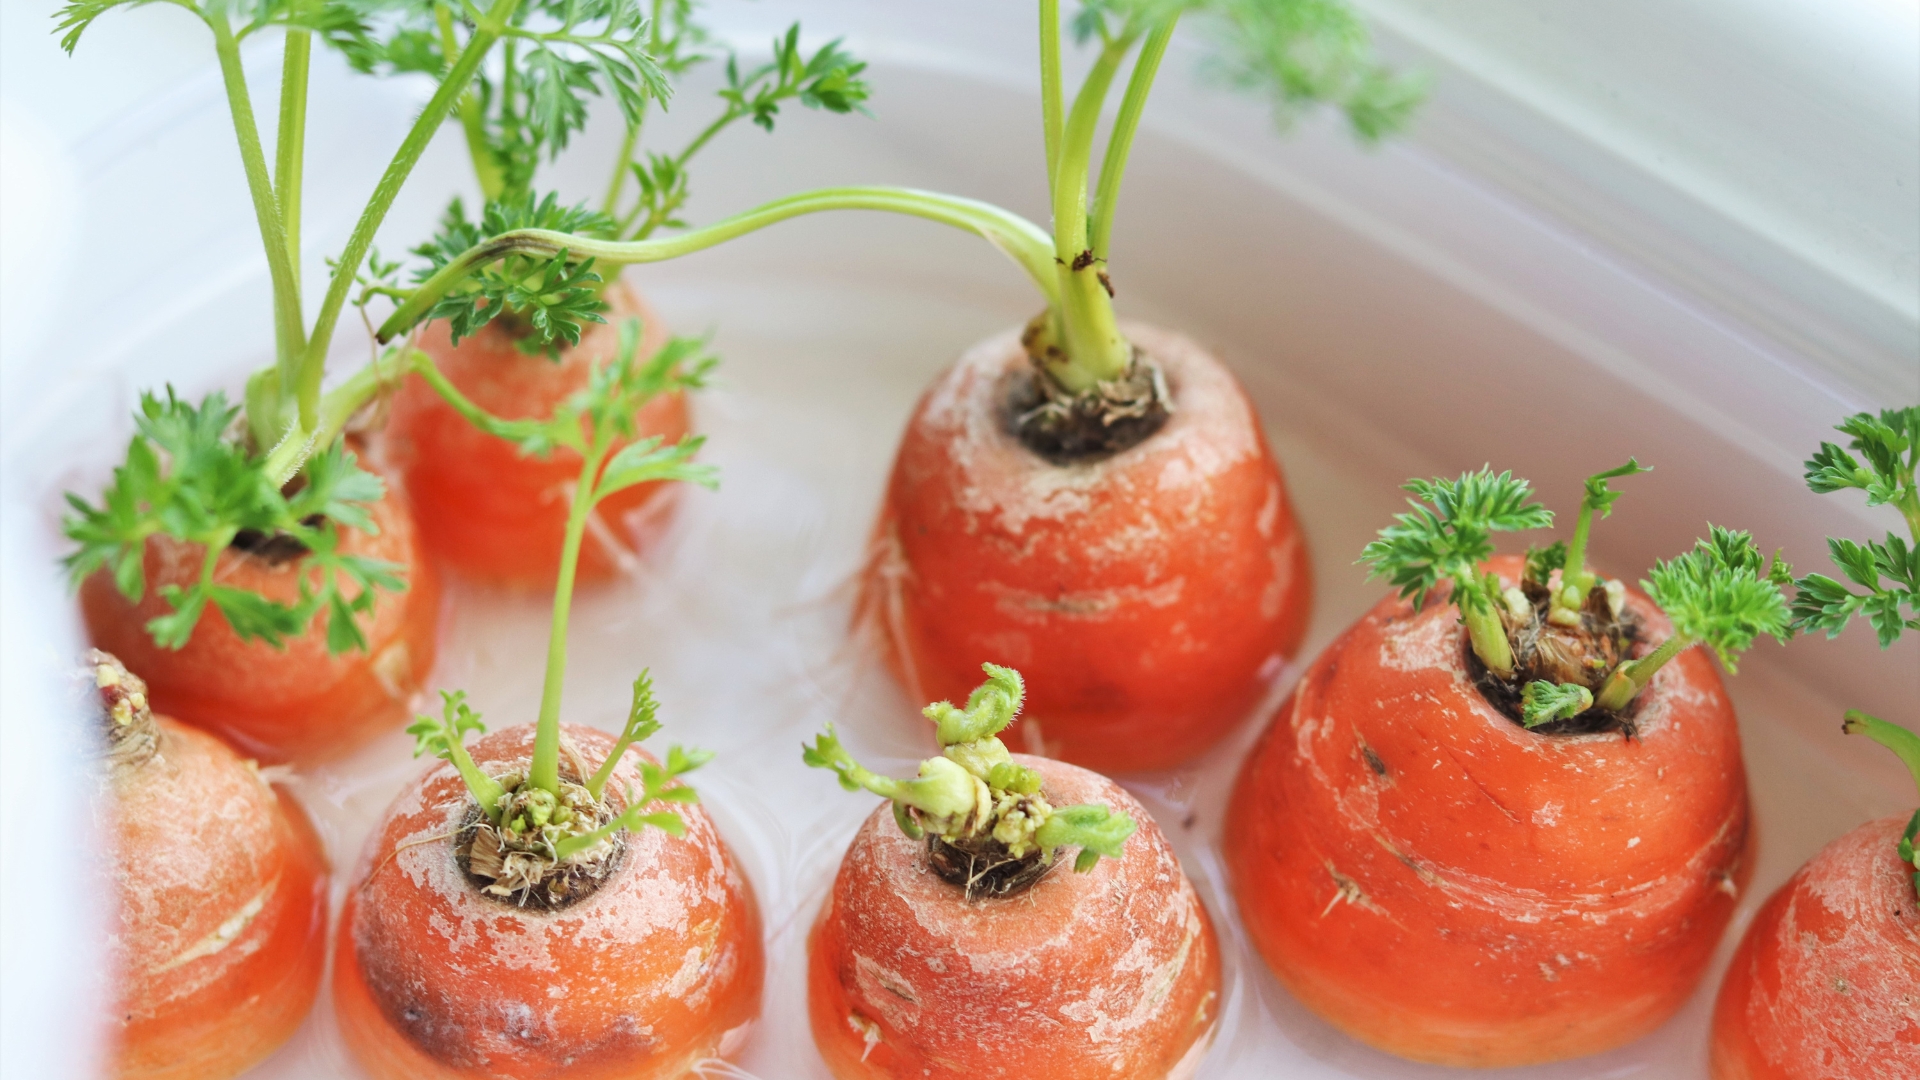 Why And How To Grow Carrots From Carrot Tops